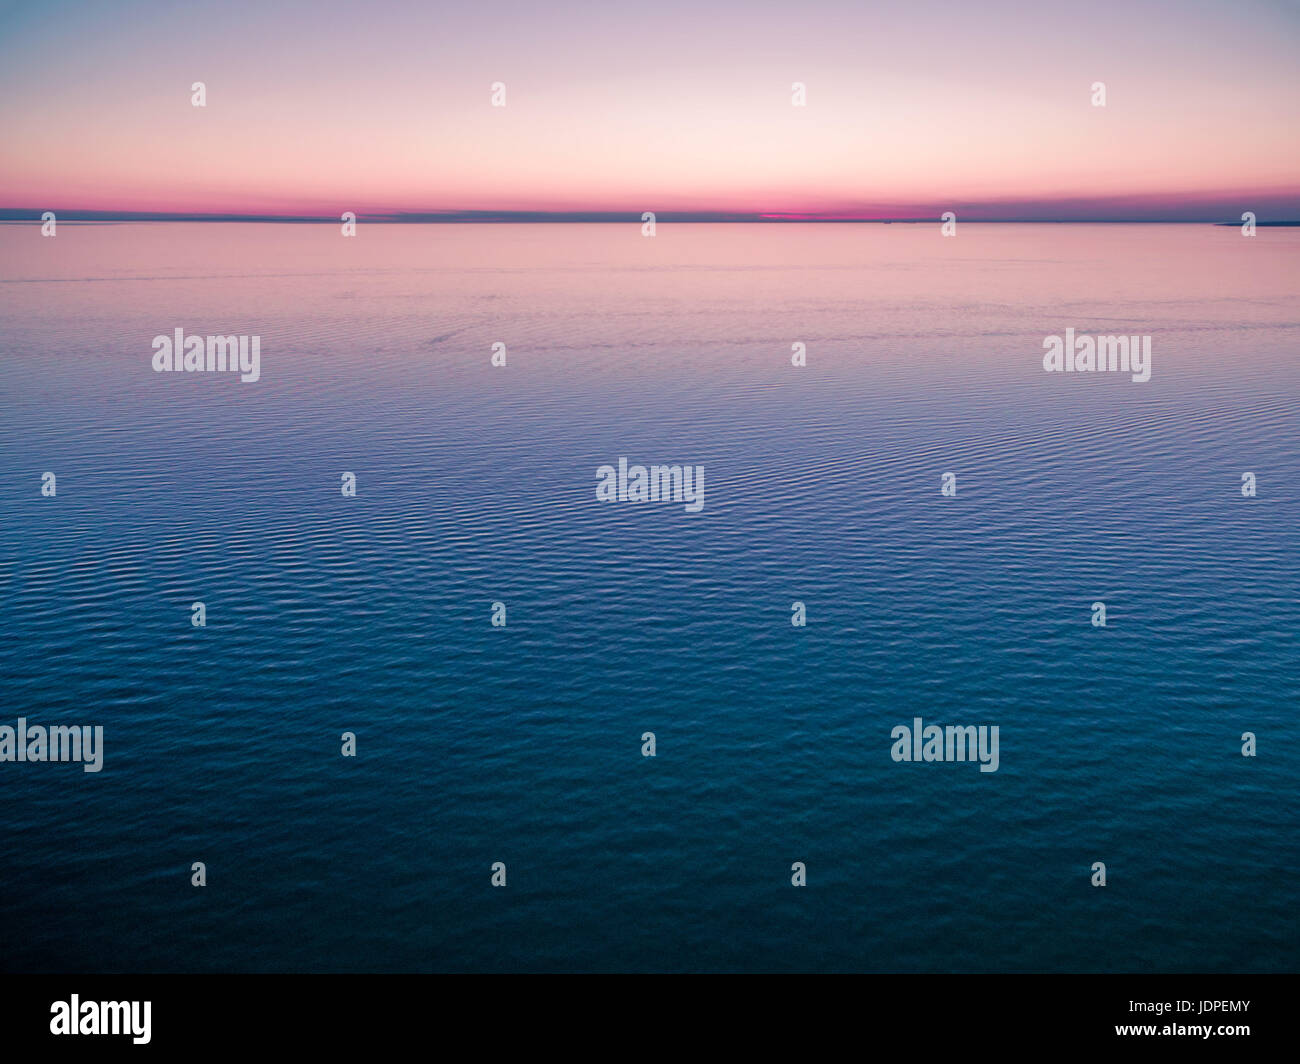 Empty horizon over water at dusk. nothing but water and clear sky. Stock Photo